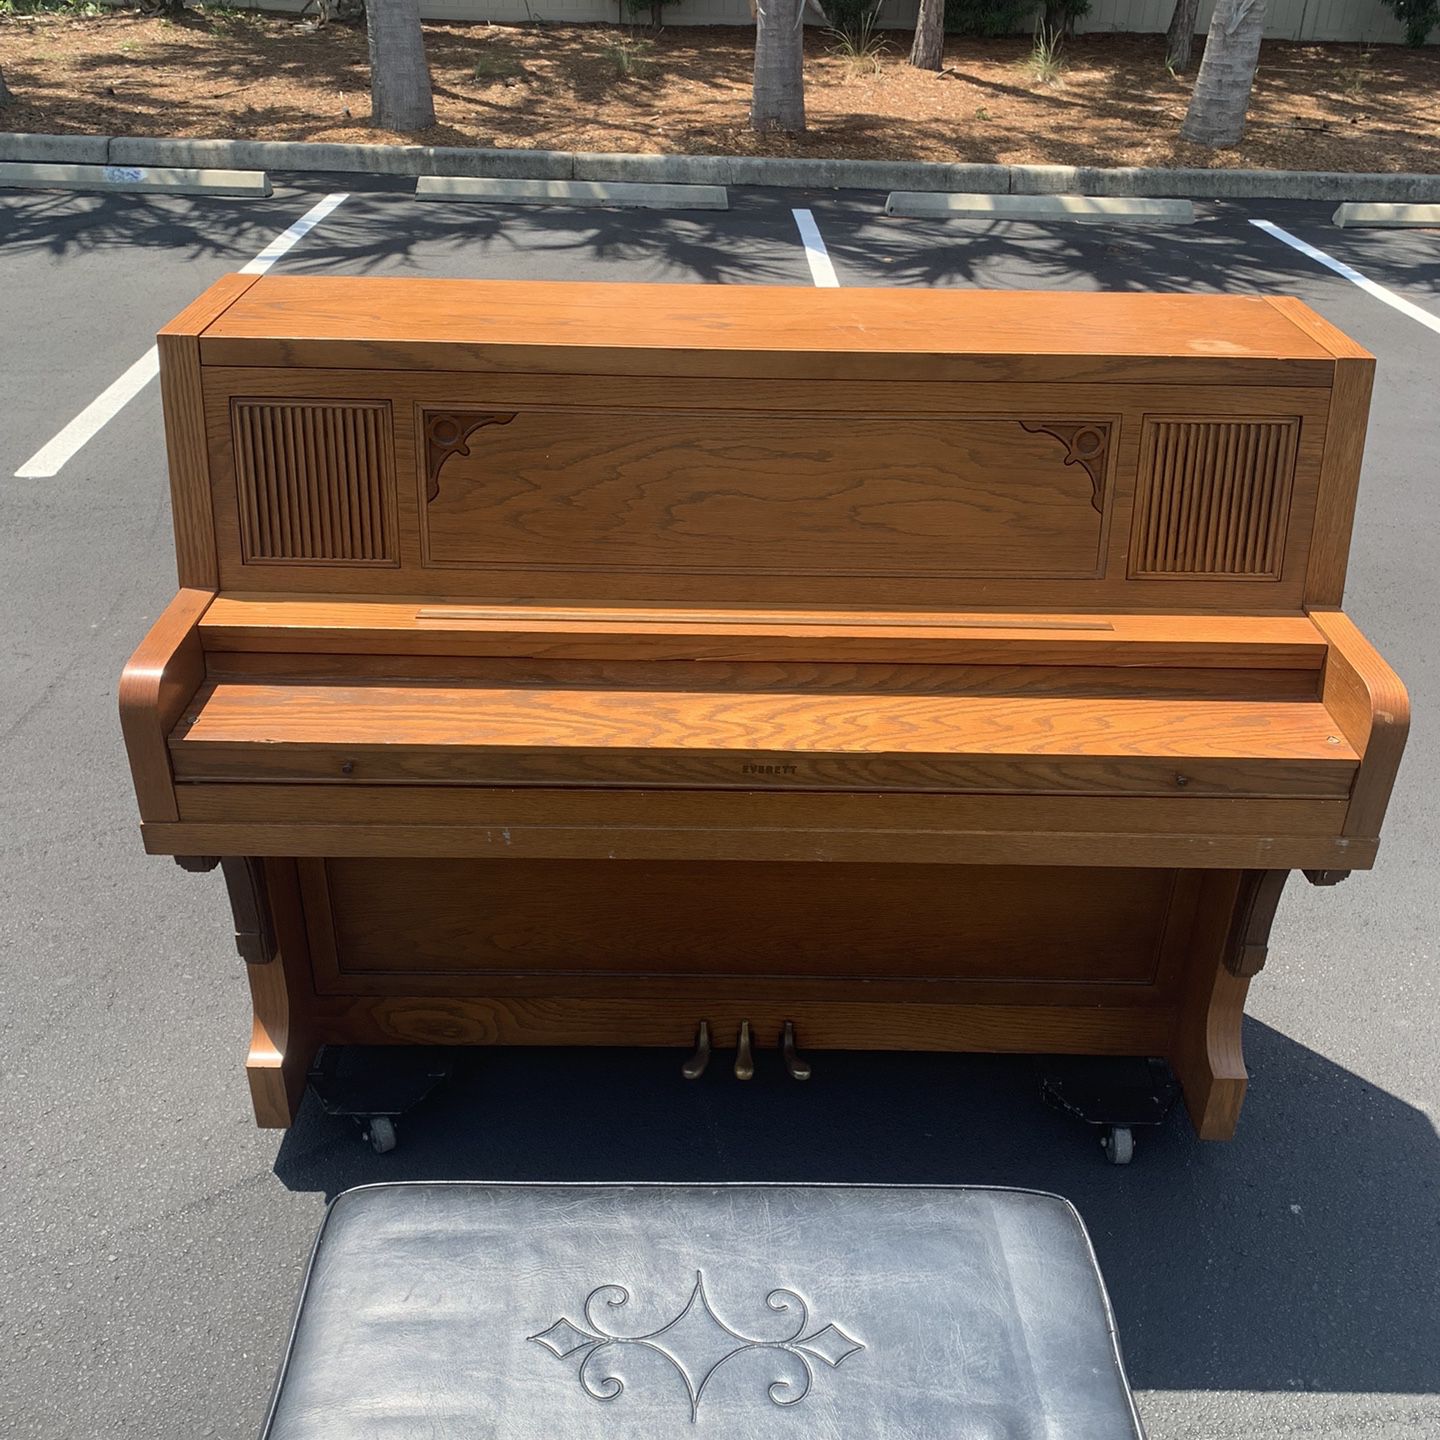 Everett piano with included playing bench